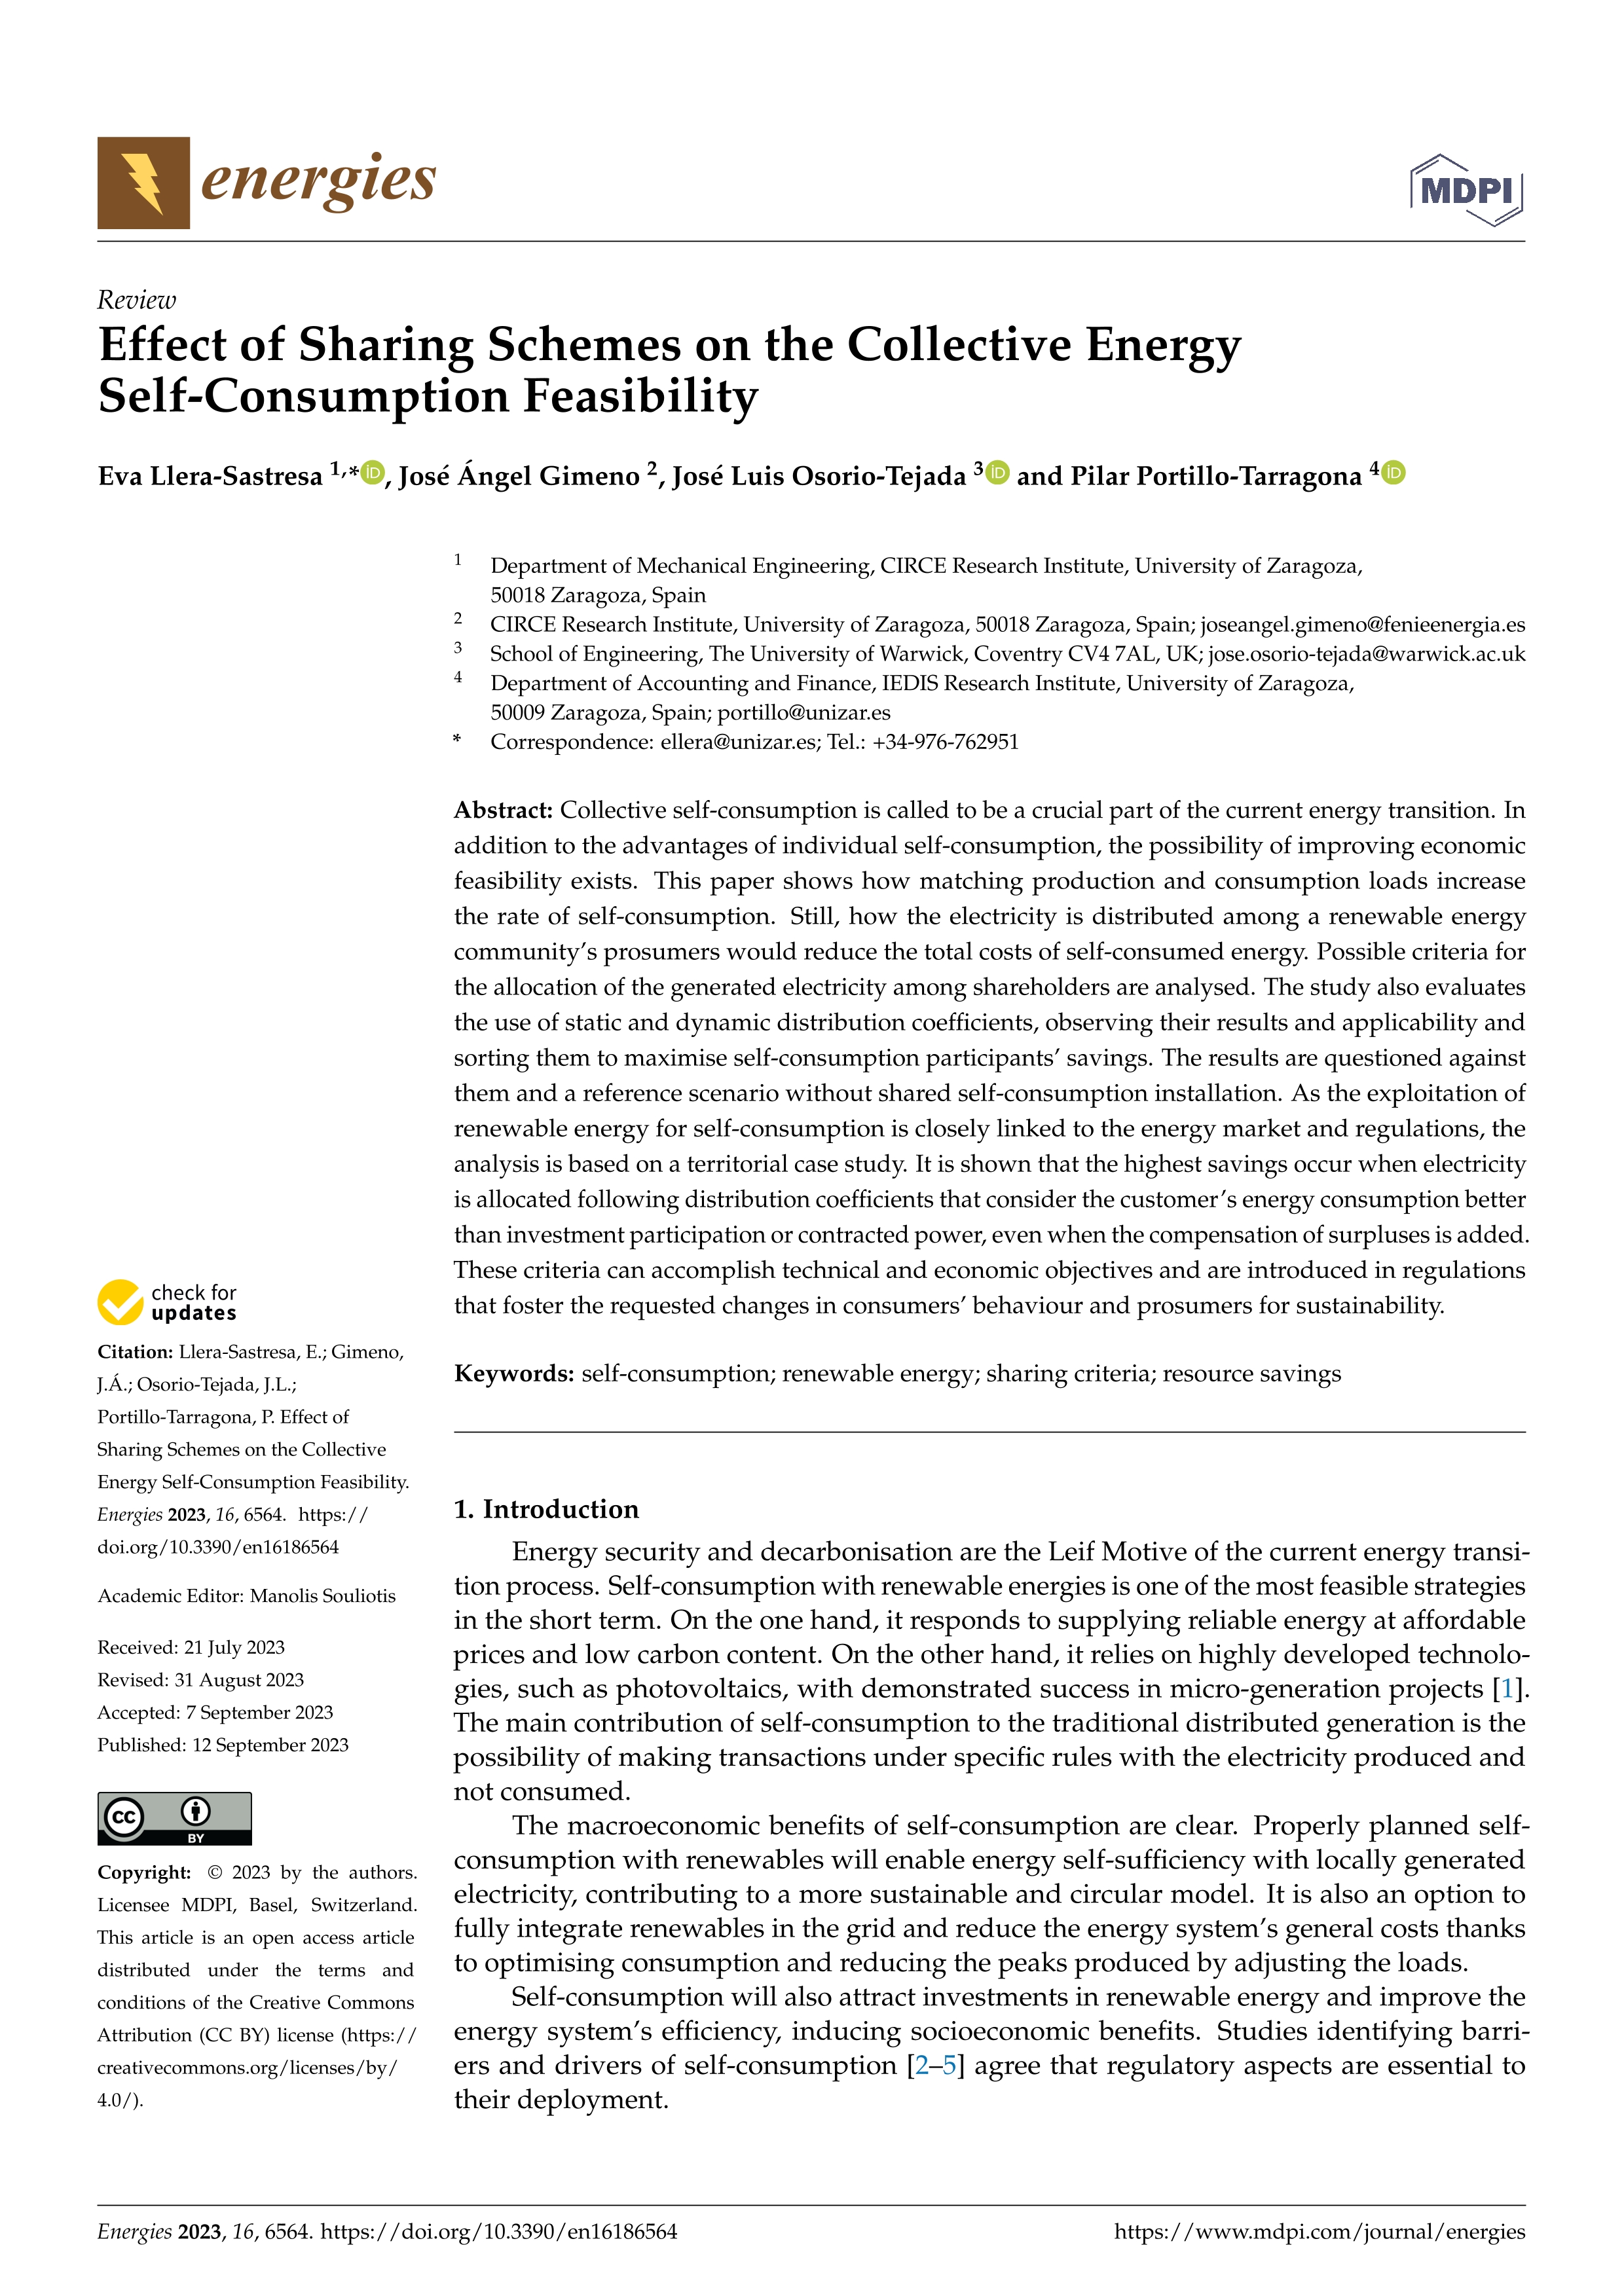 Effect of sharing schemes on the collective energy self-consumption feasibility